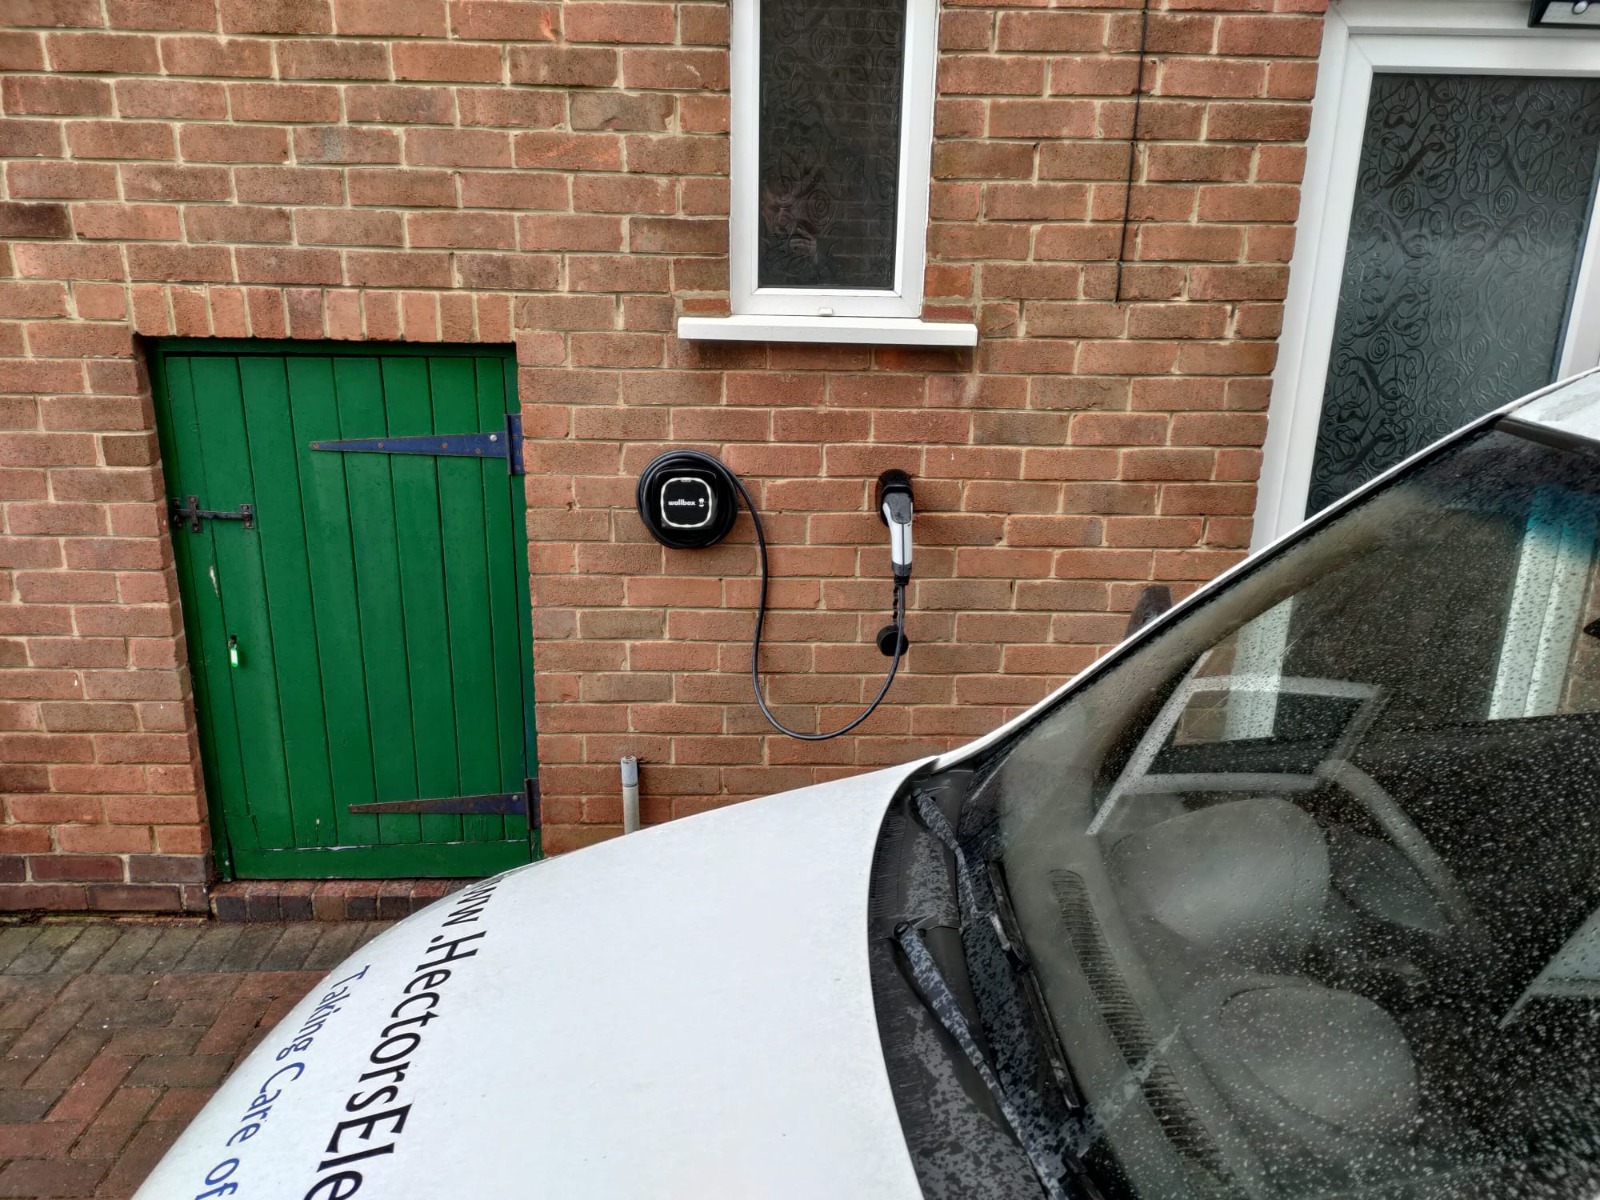 An image of the Wallbox Pulsar Plus 7kW EV situated on the wall